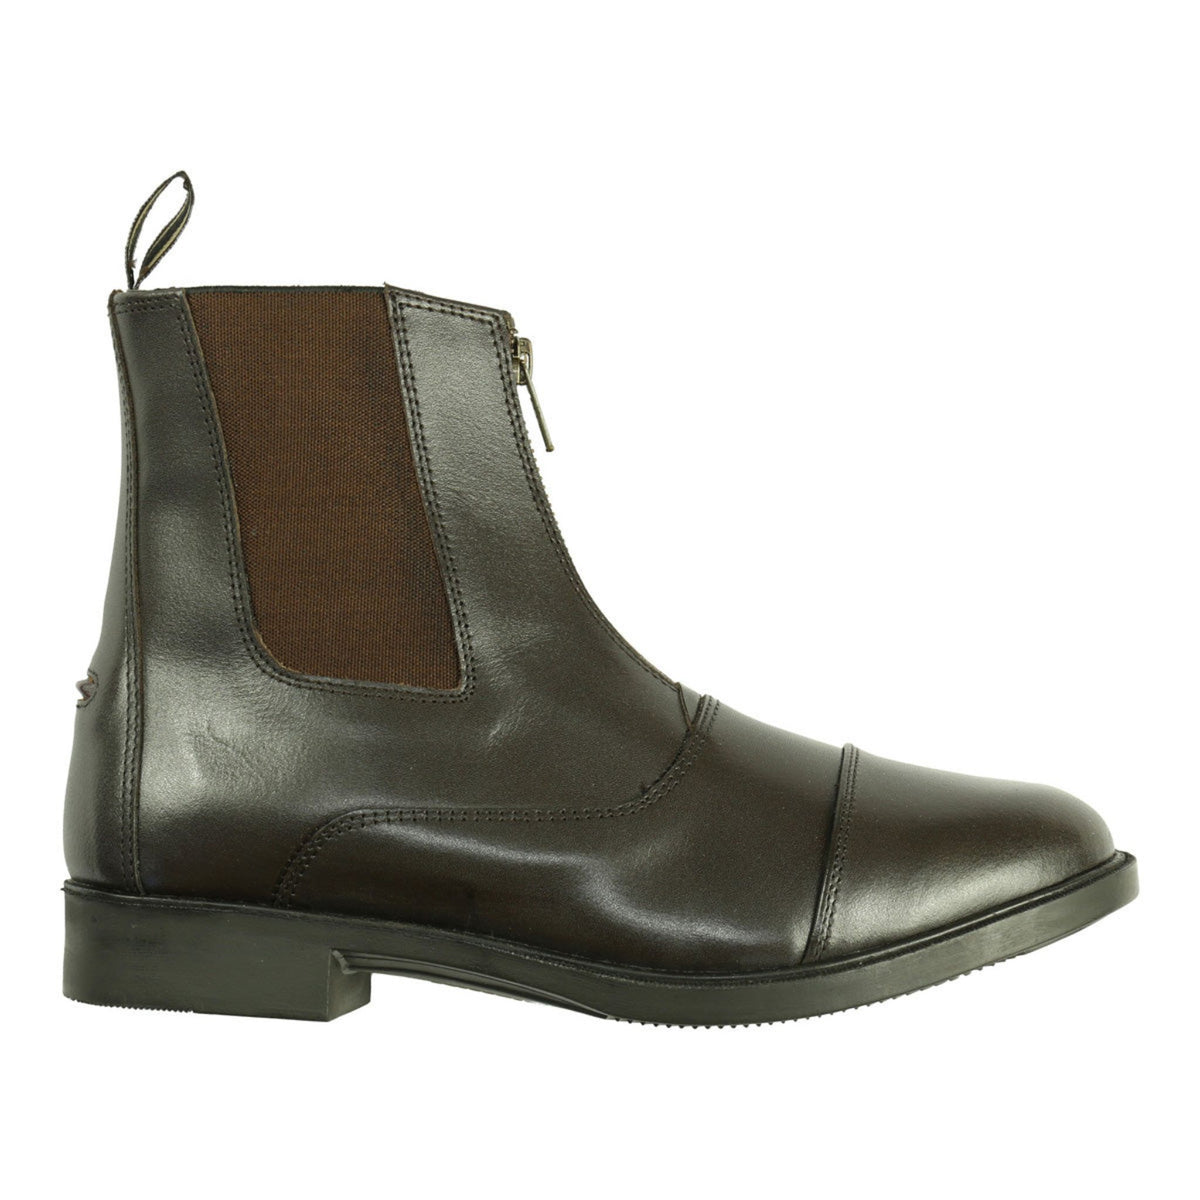 Side view of zip front jodhpur boots in brown leather.